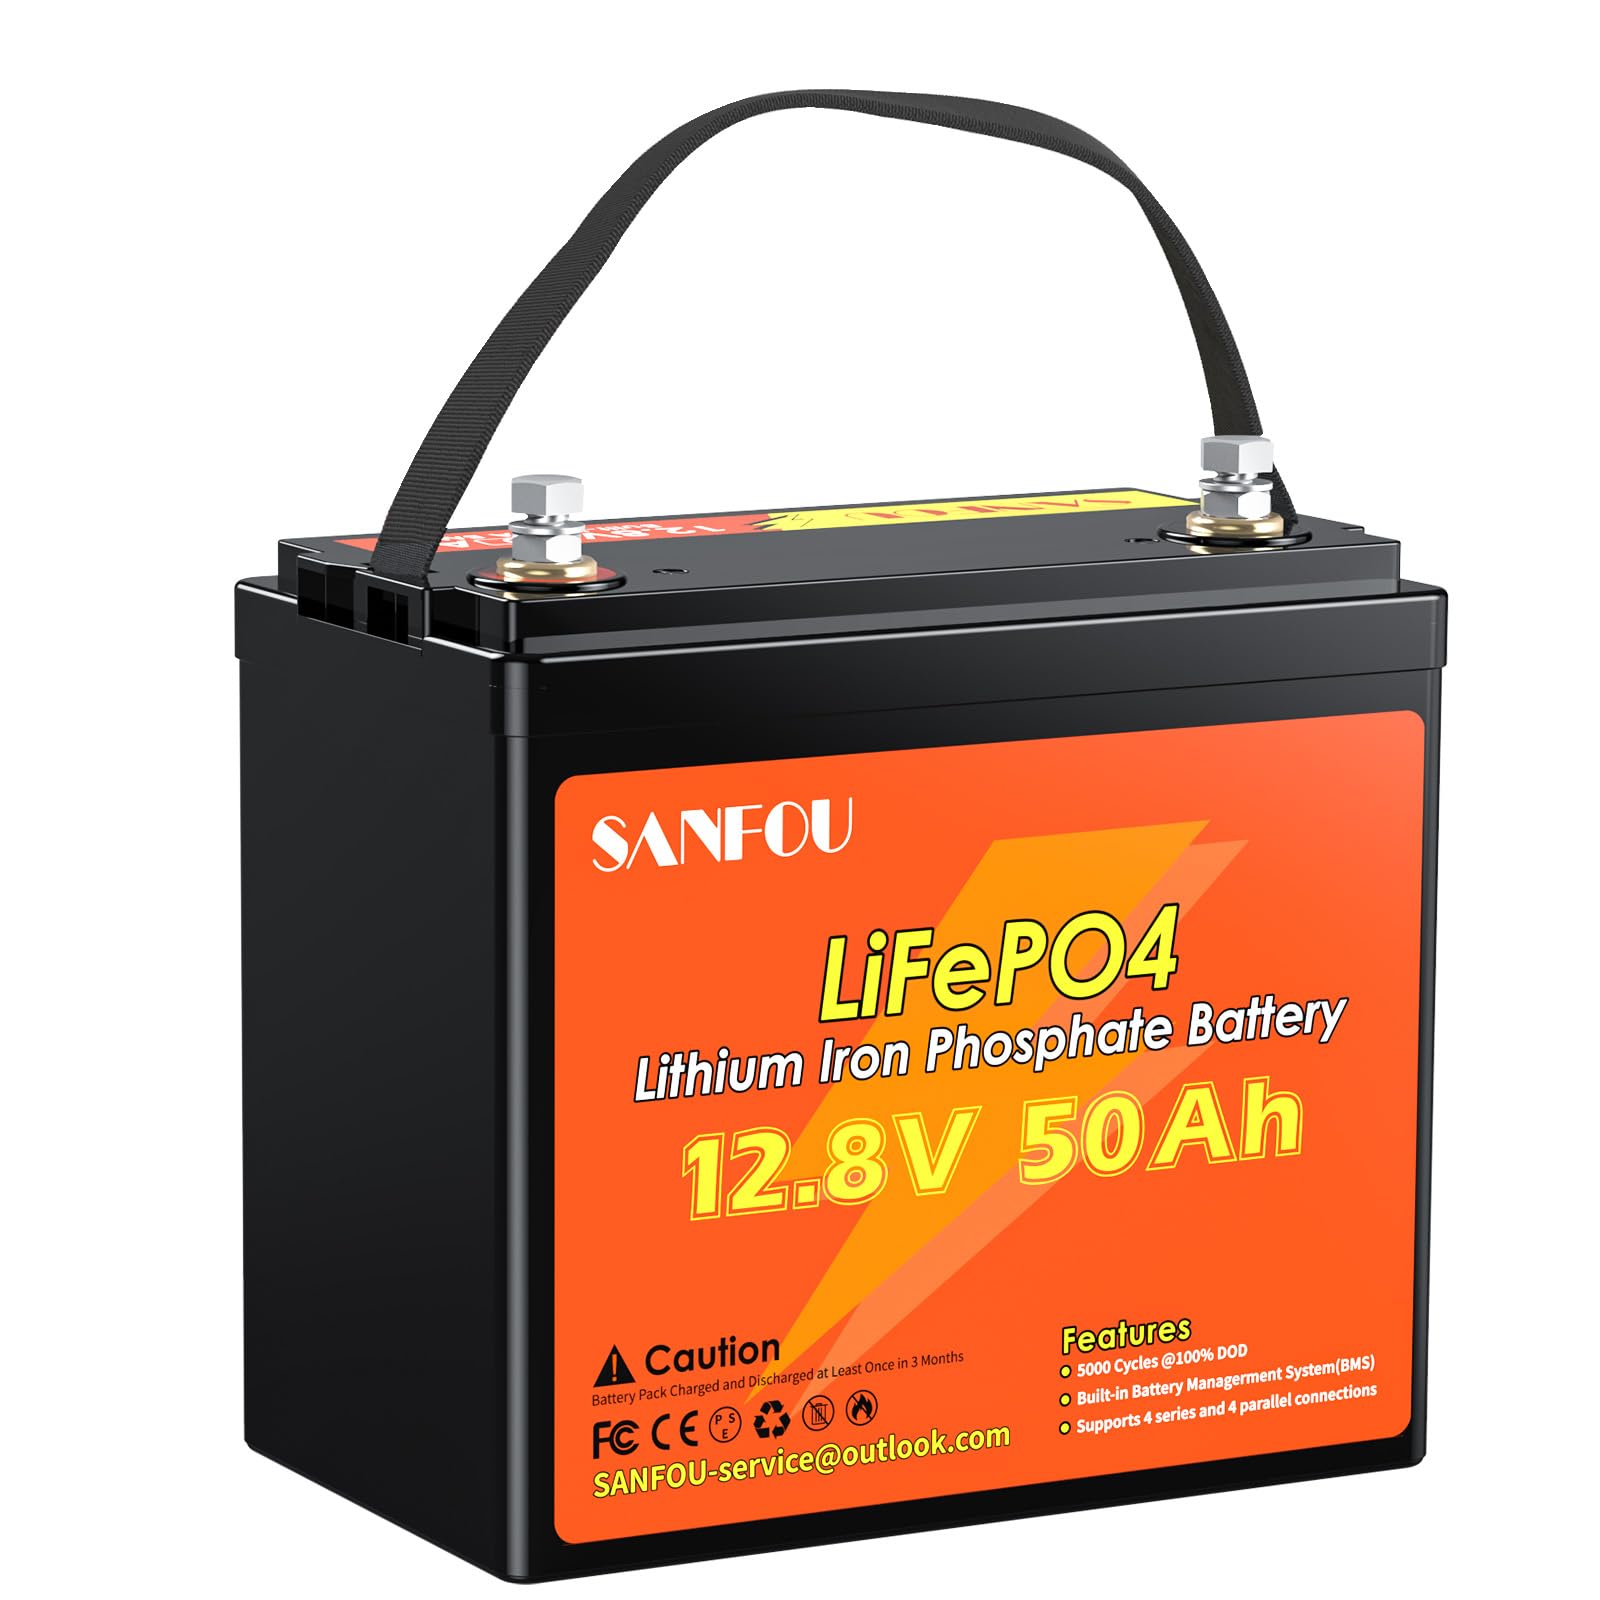 SANFOU 12V 50Ah LiFePO4 Battery, 640Wh Lithium Battery with 50A BMS, 5000-15000 Times Autobatterien, Support 4S4P, Perfect as a Power Source for Motorhomes Camping von SANFOU